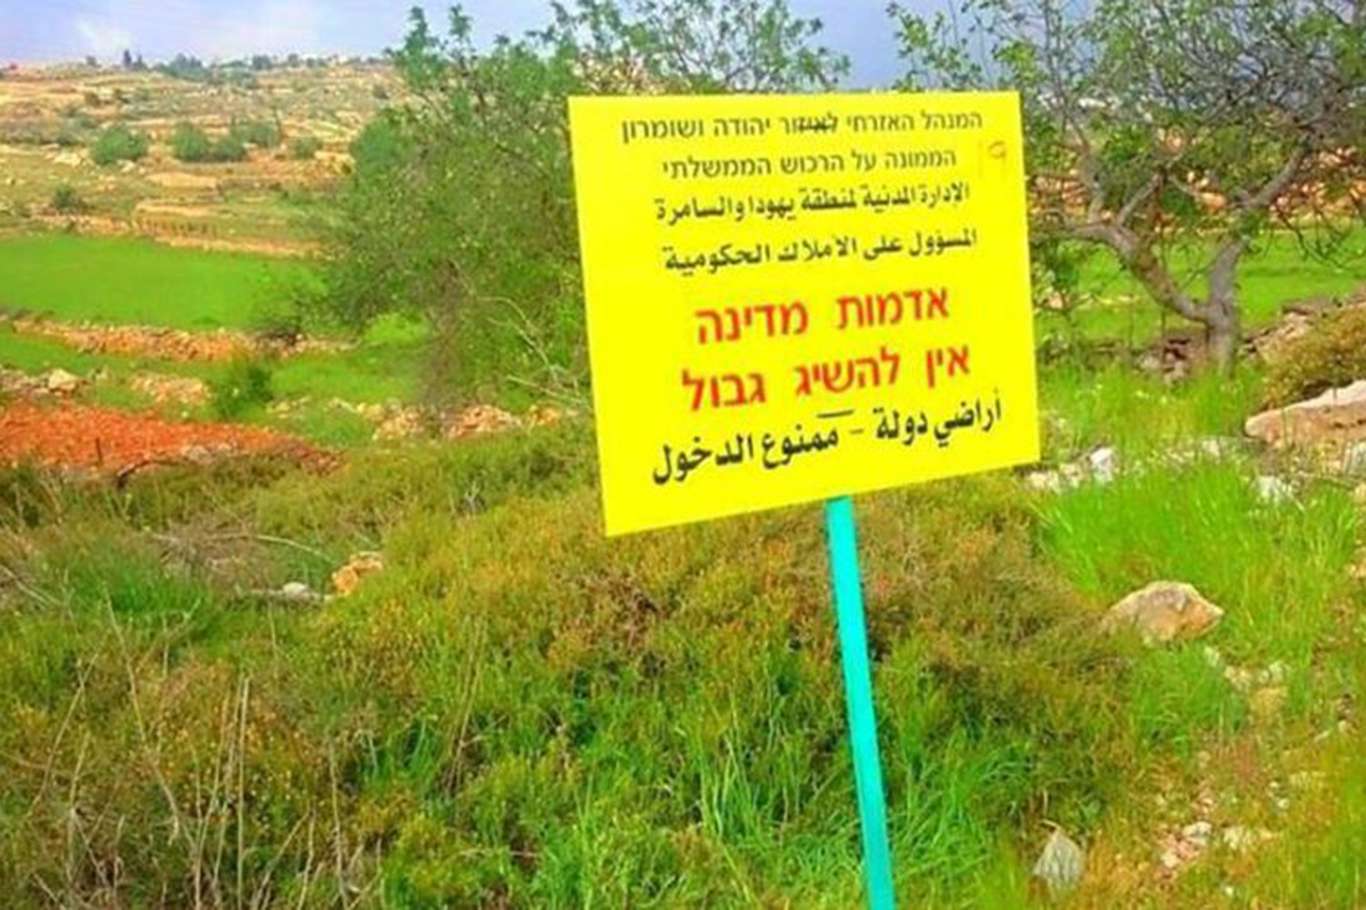 Zionist regime announces appropriation of 193 dunums east of Ramallah